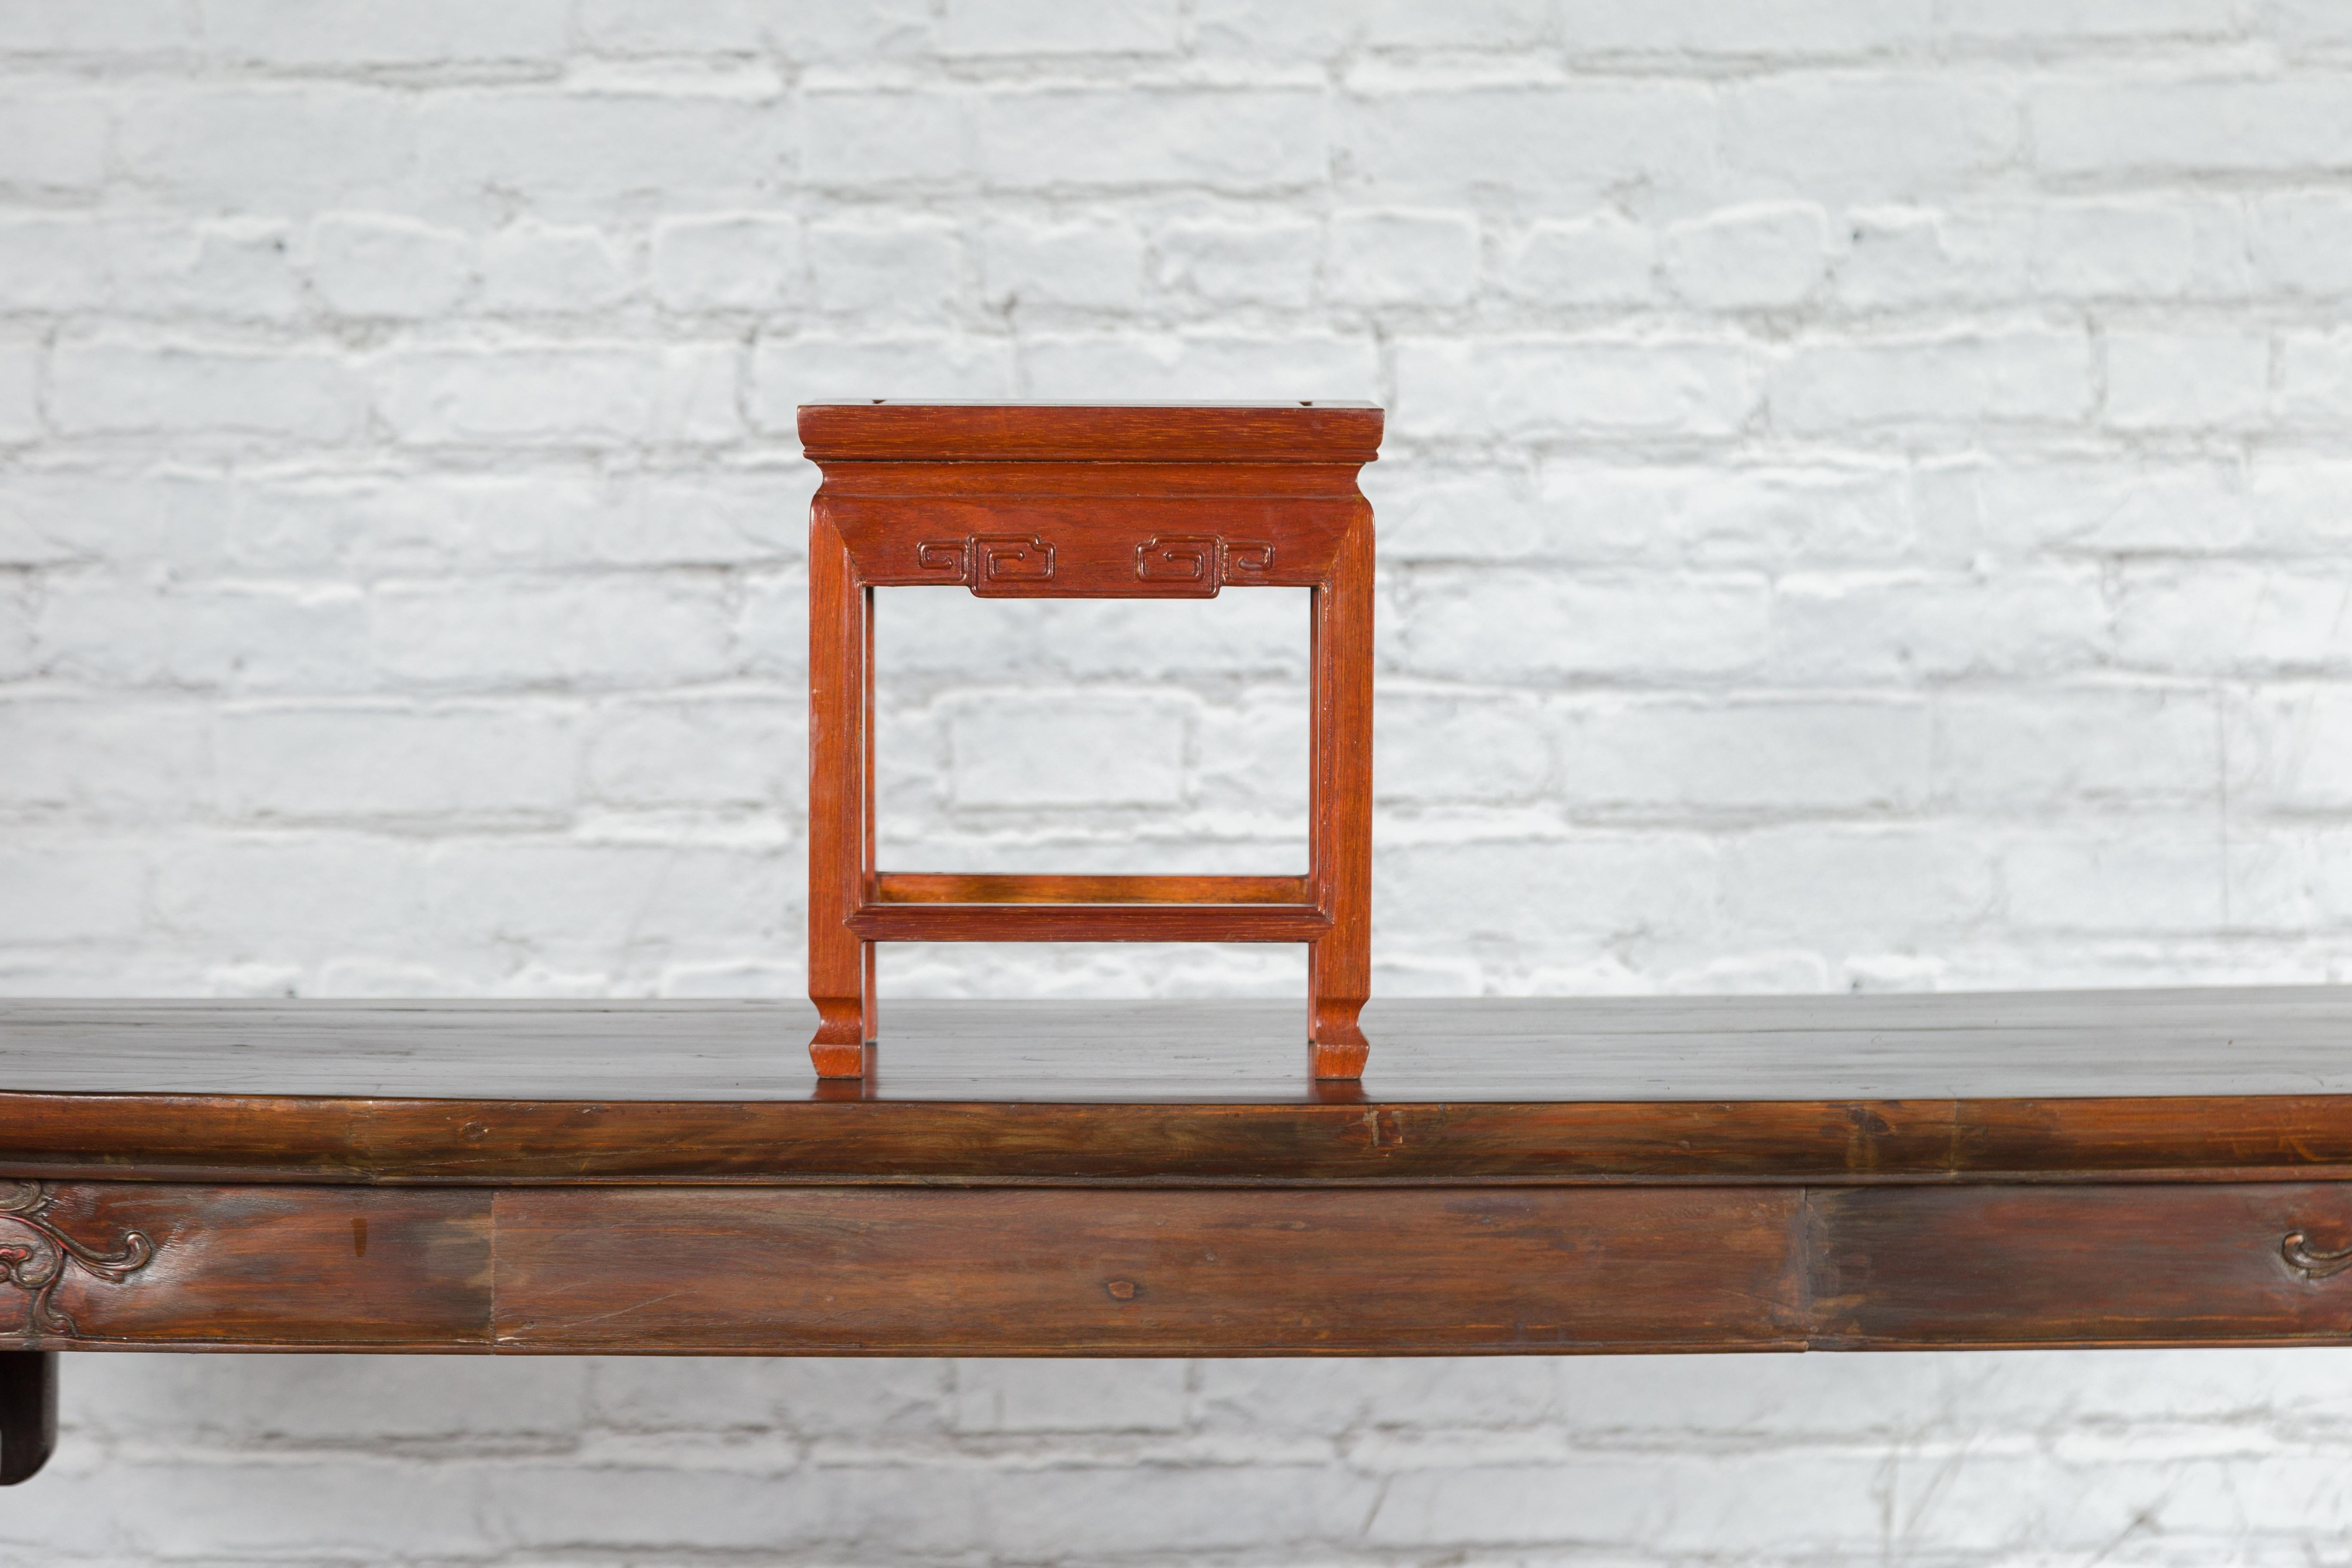 A vintage Chinese lacquered wood stool from the mid 20th century, with carved apron and side stretchers. Created in China during the midcentury period, this small lacquered stool features a rectangular top with central board, sitting above an